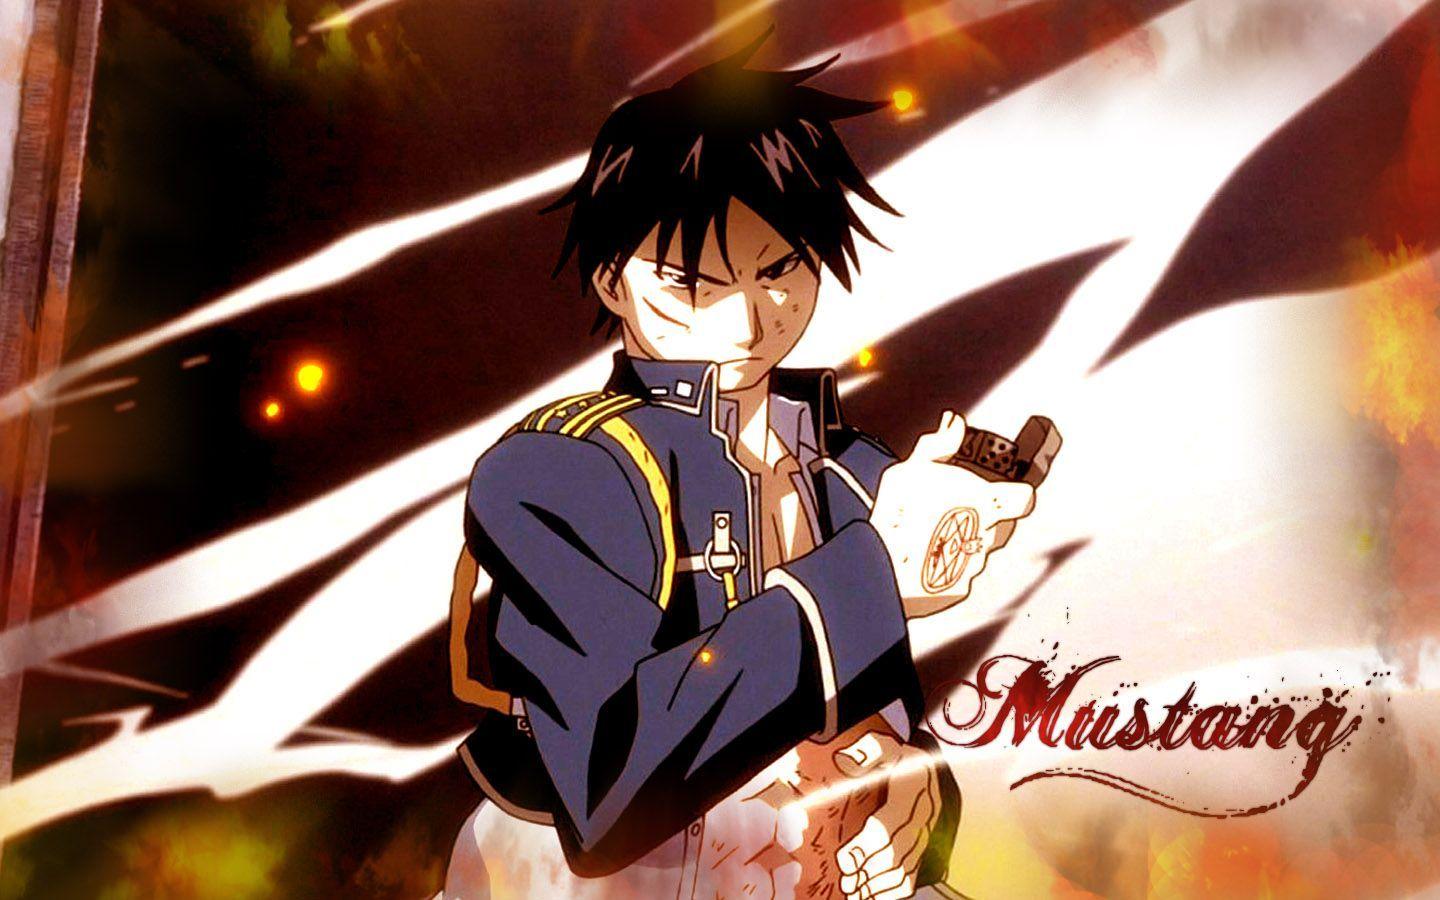 Roy_Mustang_by_hand_made_